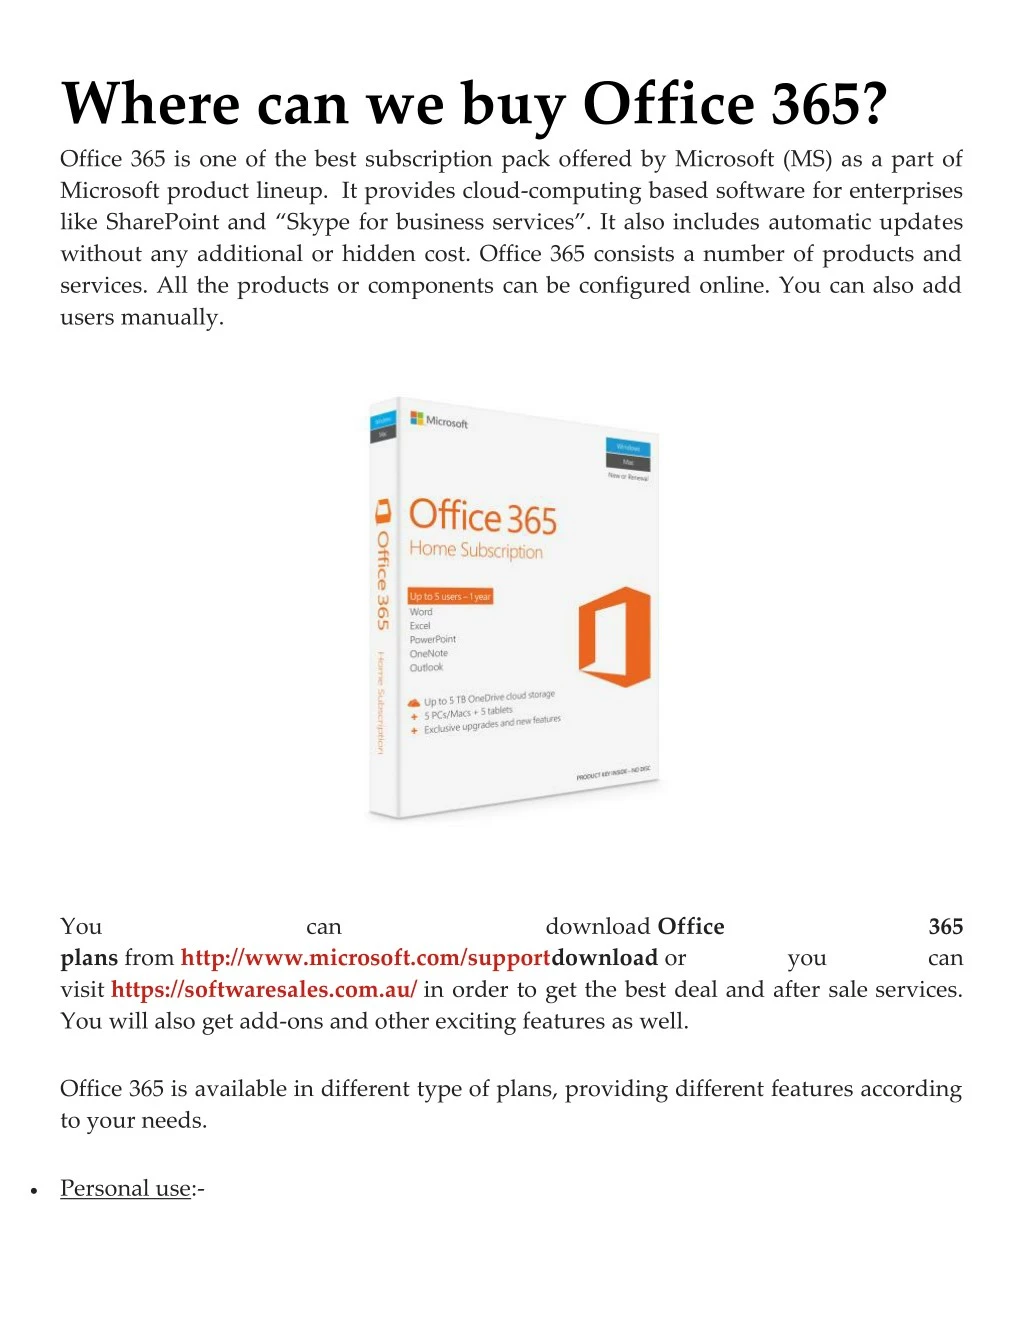 where can we buy office 365 office